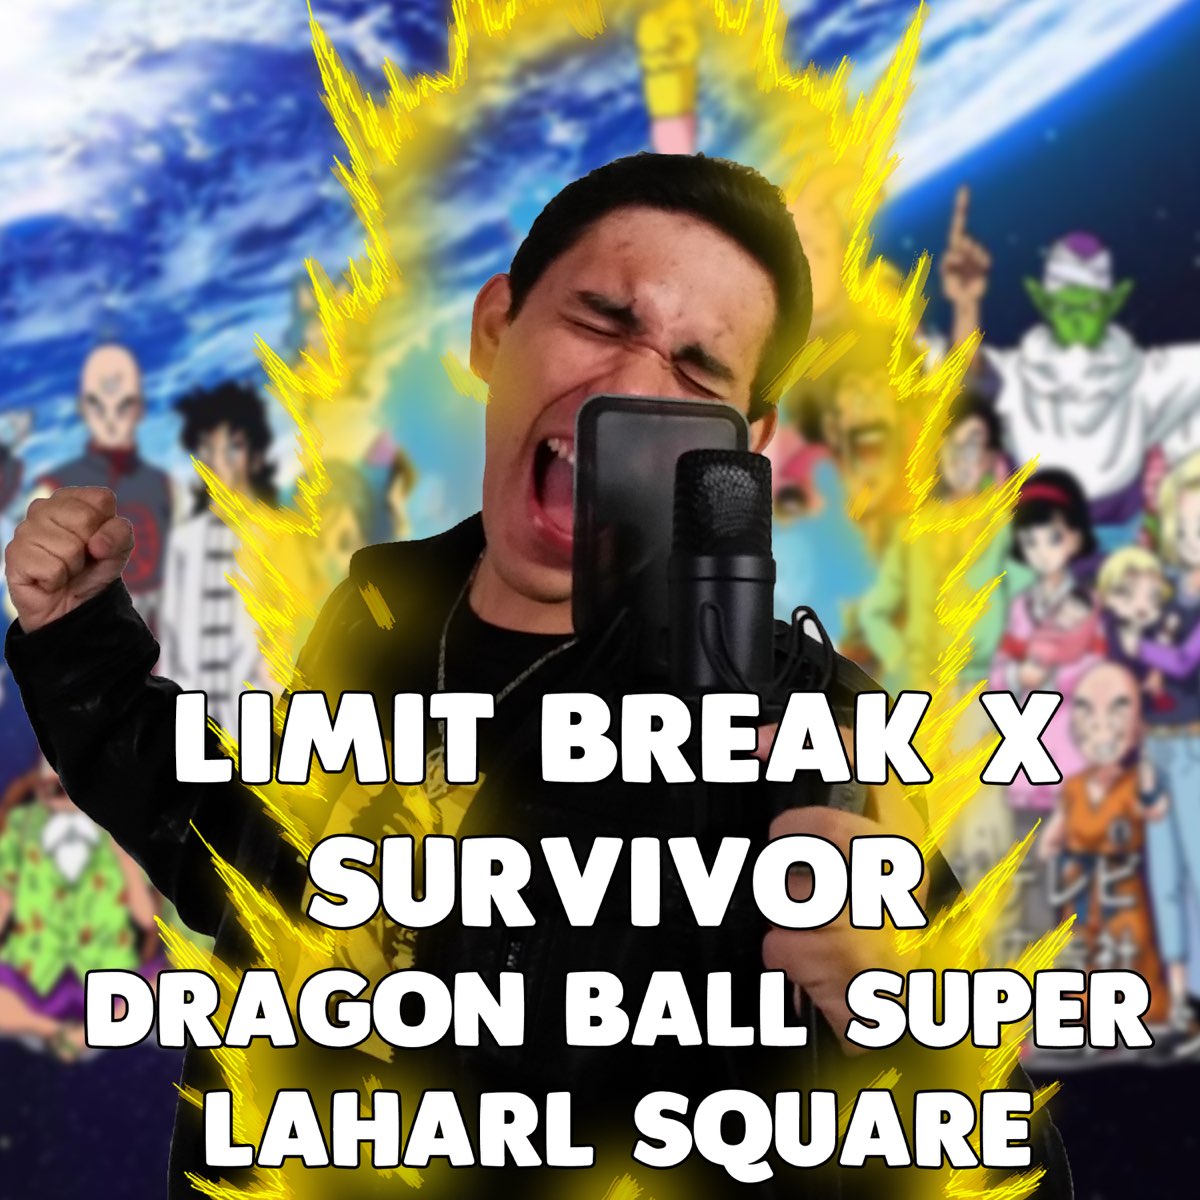 Limit Break X Survivor (From "Dragon Ball Super") [feat. omar1up] - Single  by Laharl Square on Apple Music